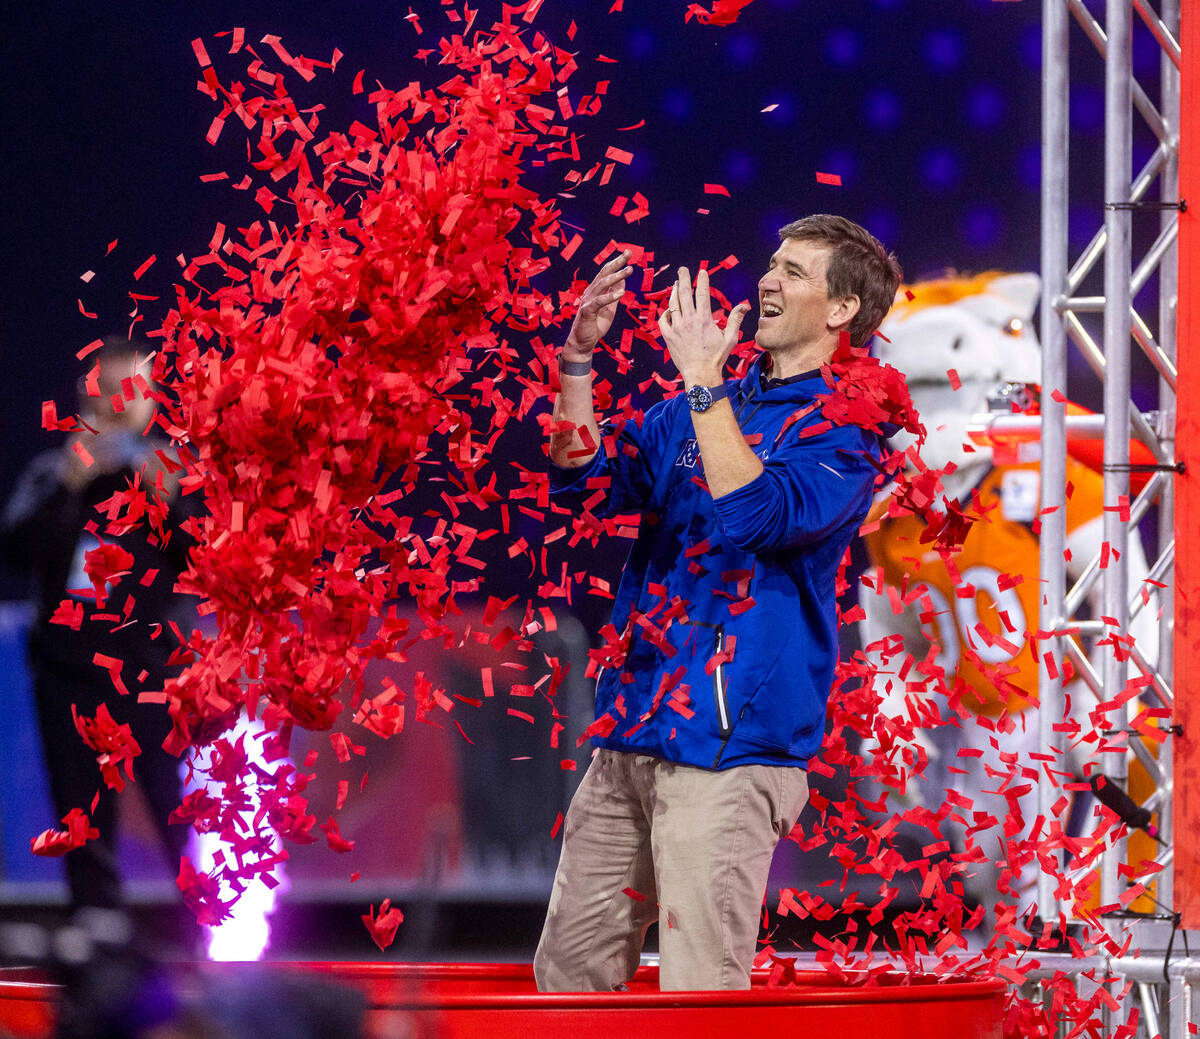 The NFC's coach Eli Manning is dumped on with confetti after losing a target passing game in th ...